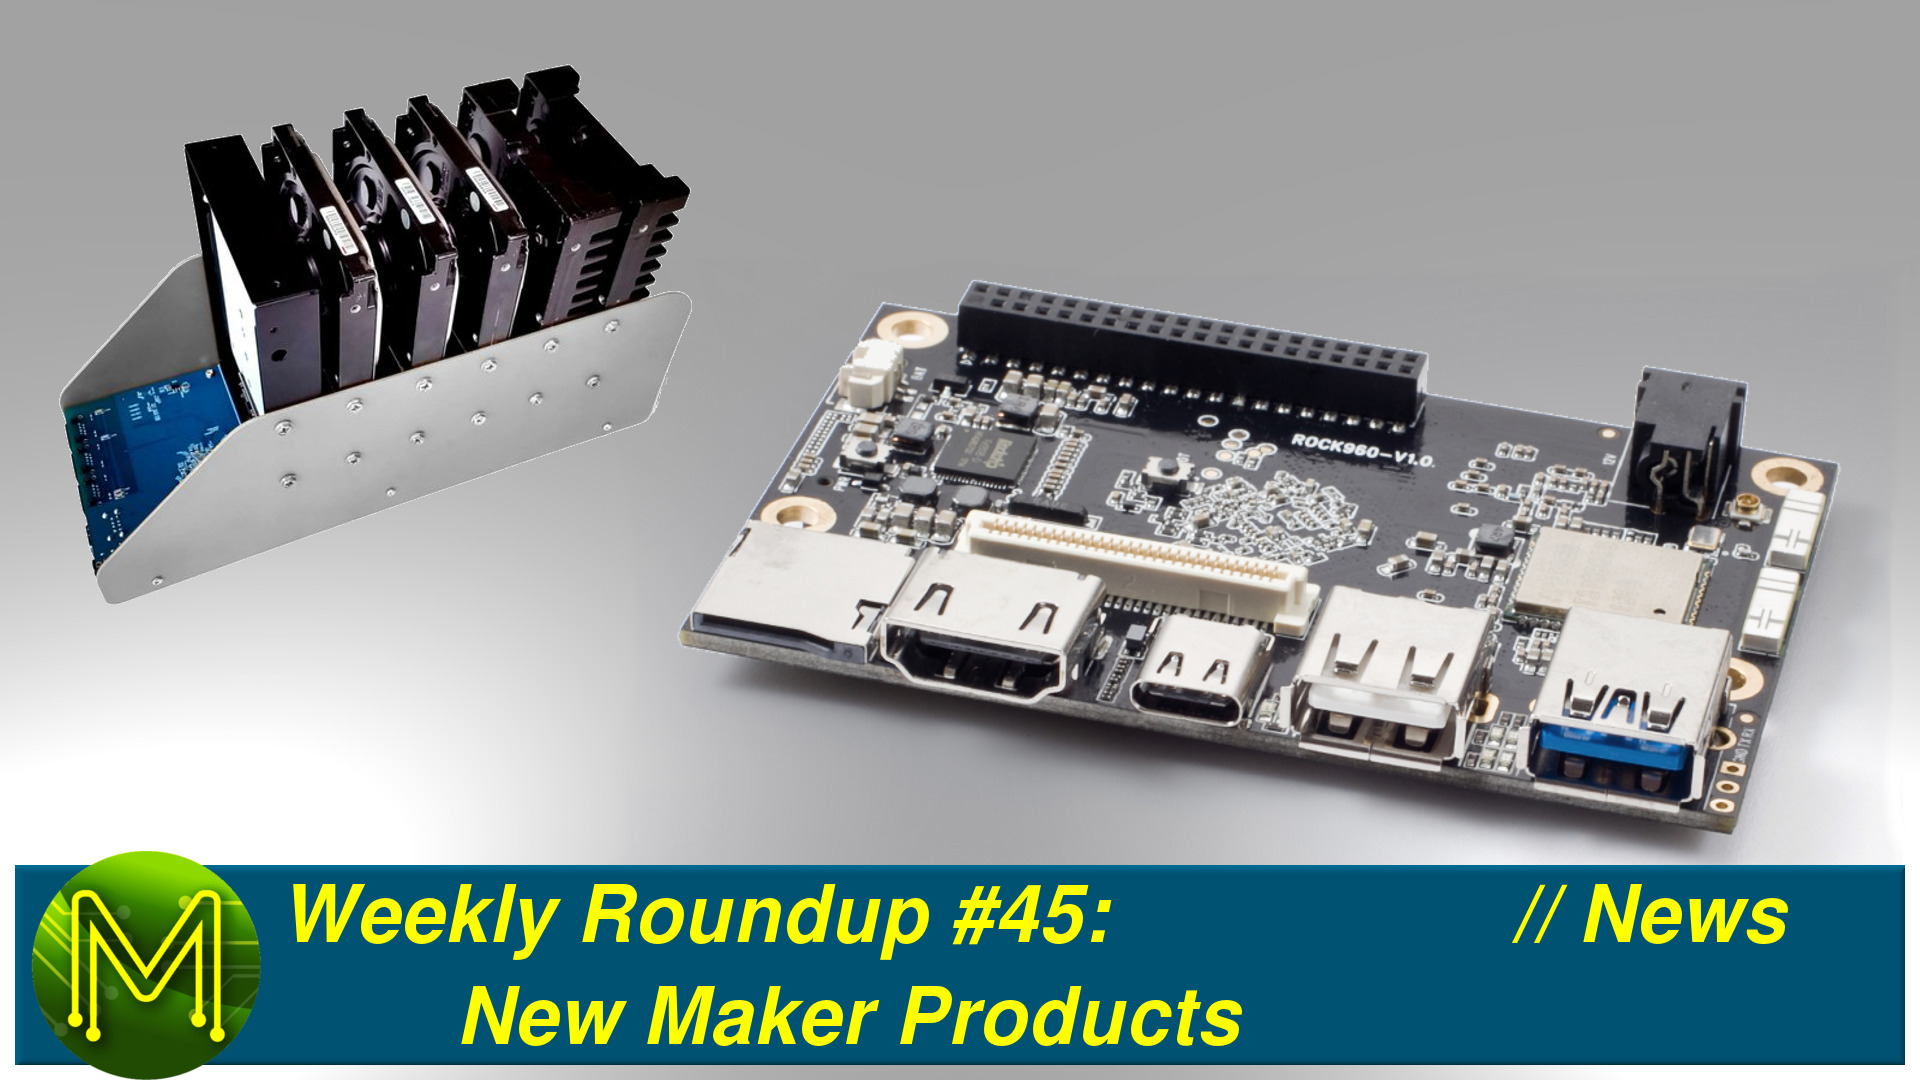 Weekly Roundup #45 - New Maker Products // News